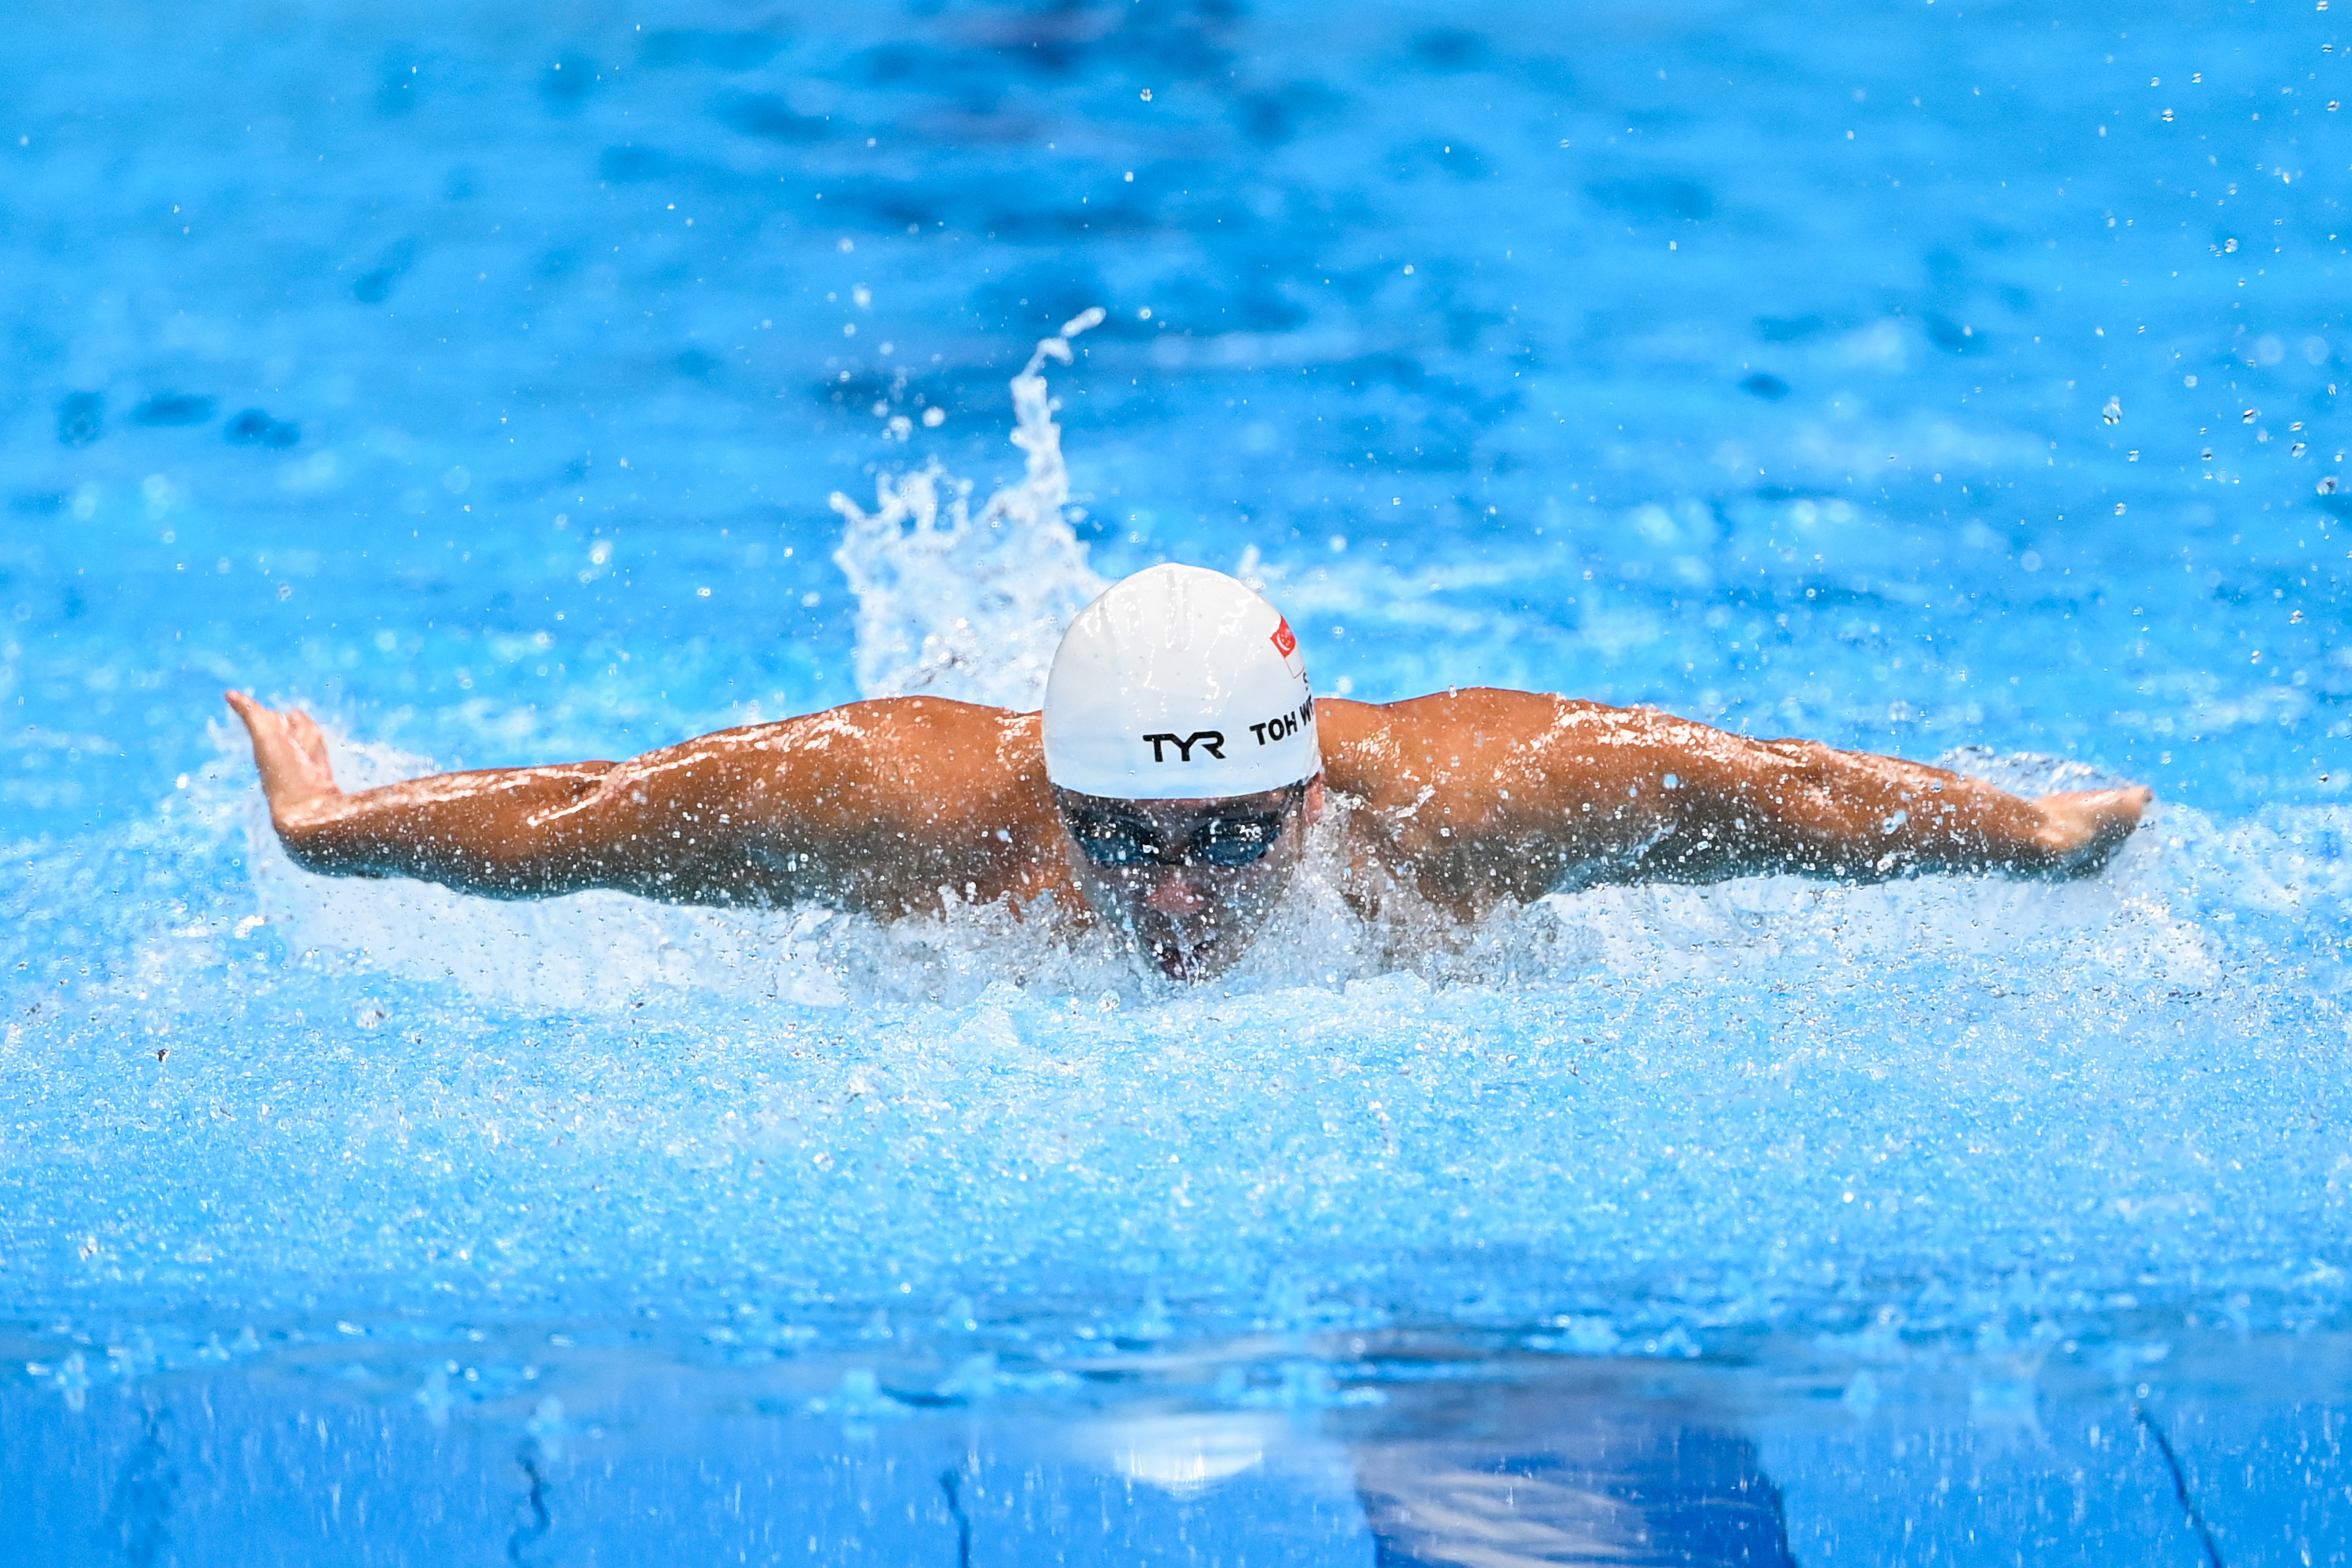 Cambodia 2023 : Toh Wei Soong's targeting 5 APG Swimming Medals en route to Paris 2024!